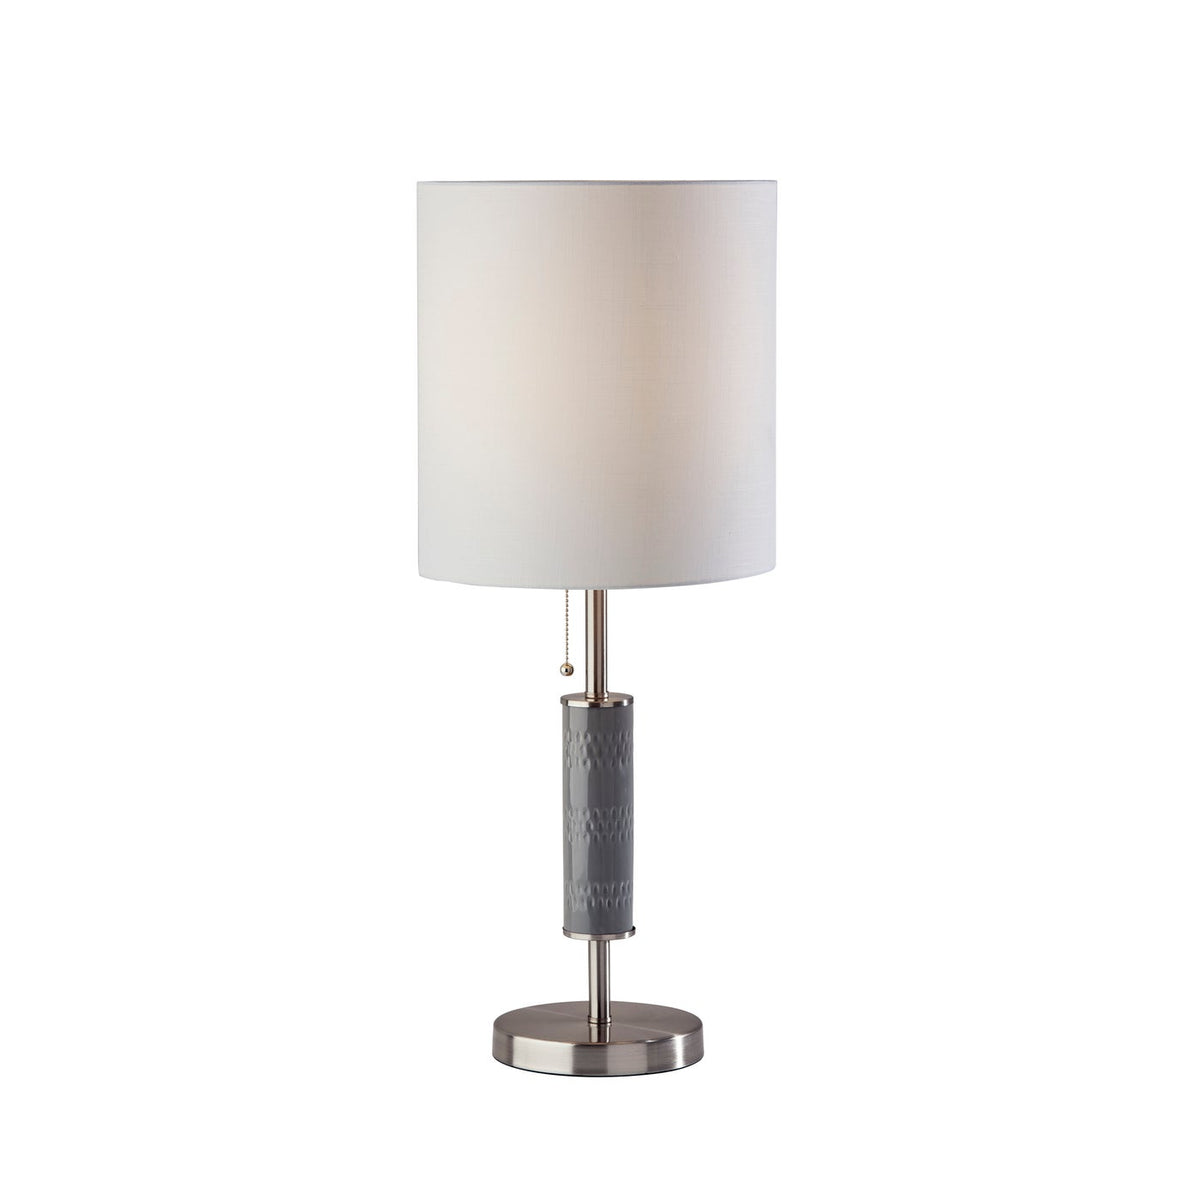 Adesso Home - 1595-22 - Table Lamp - Vanessa - Brushed Steel W. Textured Grey Ceramic